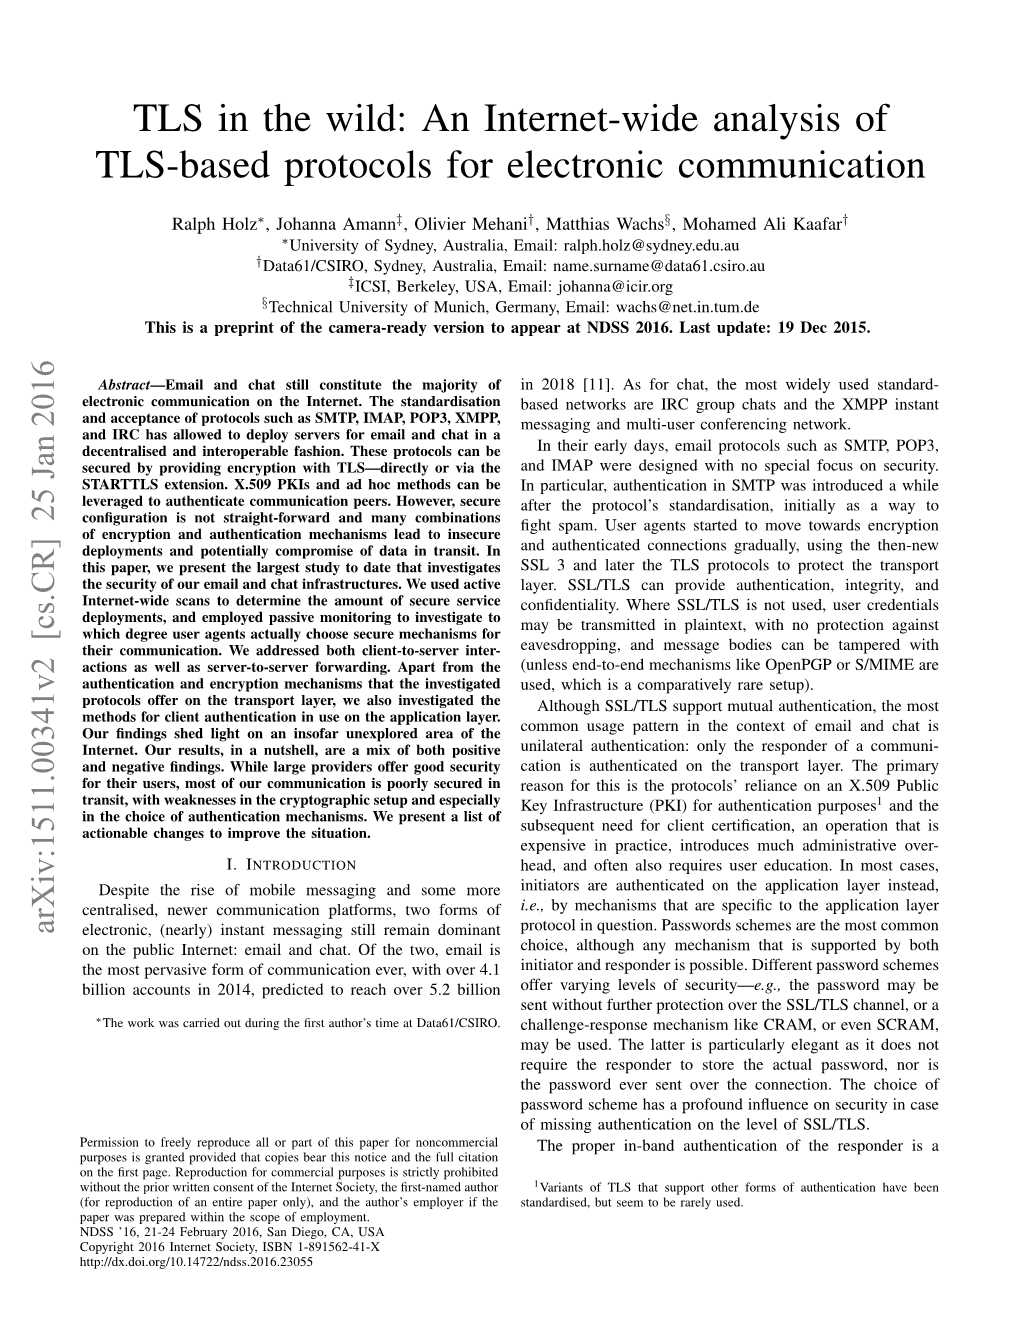 TLS in the Wild: an Internet-Wide Analysis of TLS-Based Protocols for Electronic Communication